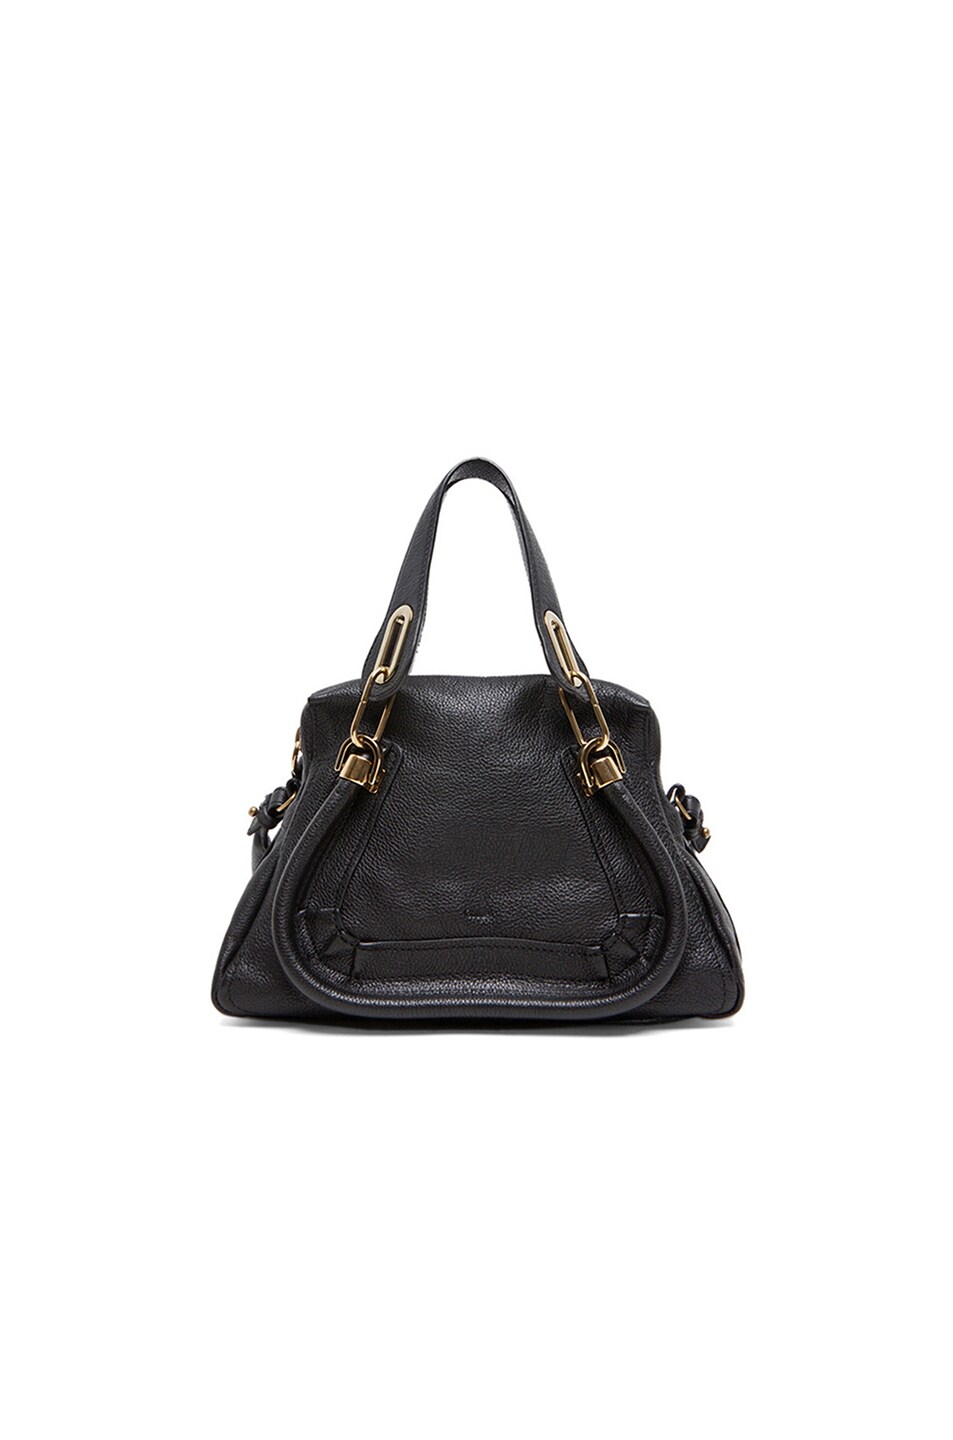 Image 1 of Chloe Small Paraty Bag in Black